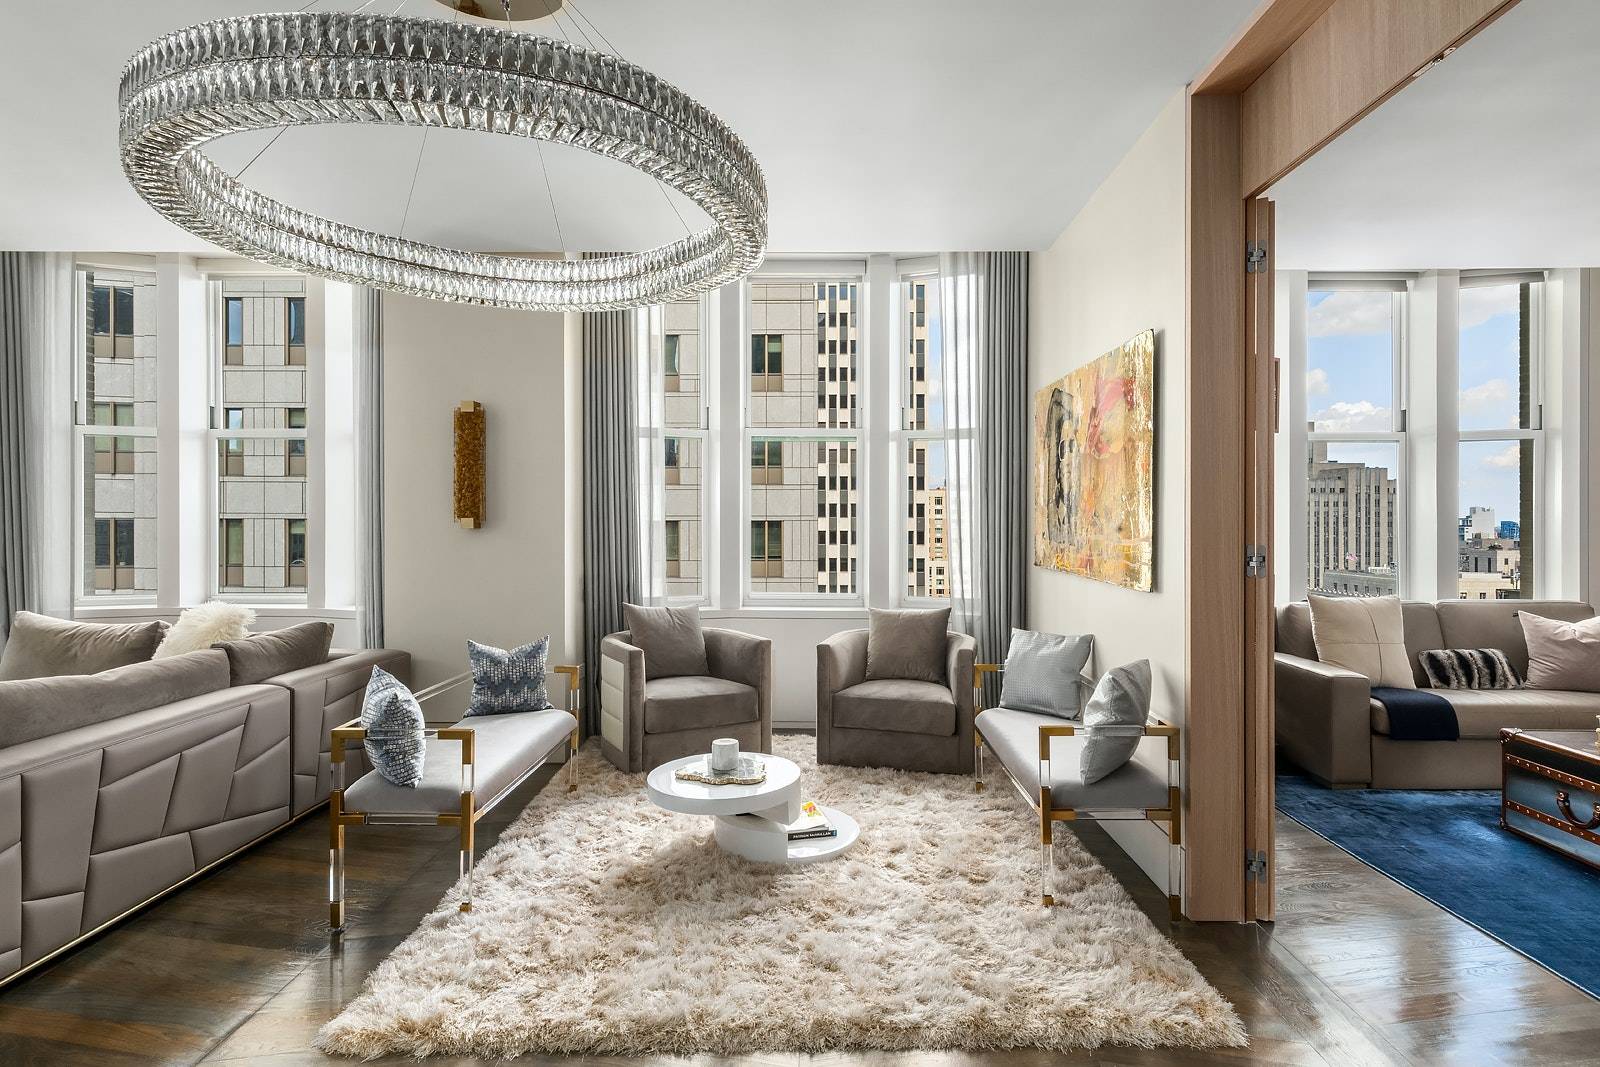 The first and most incredible high floor resale offering at 49 Chambers Street.